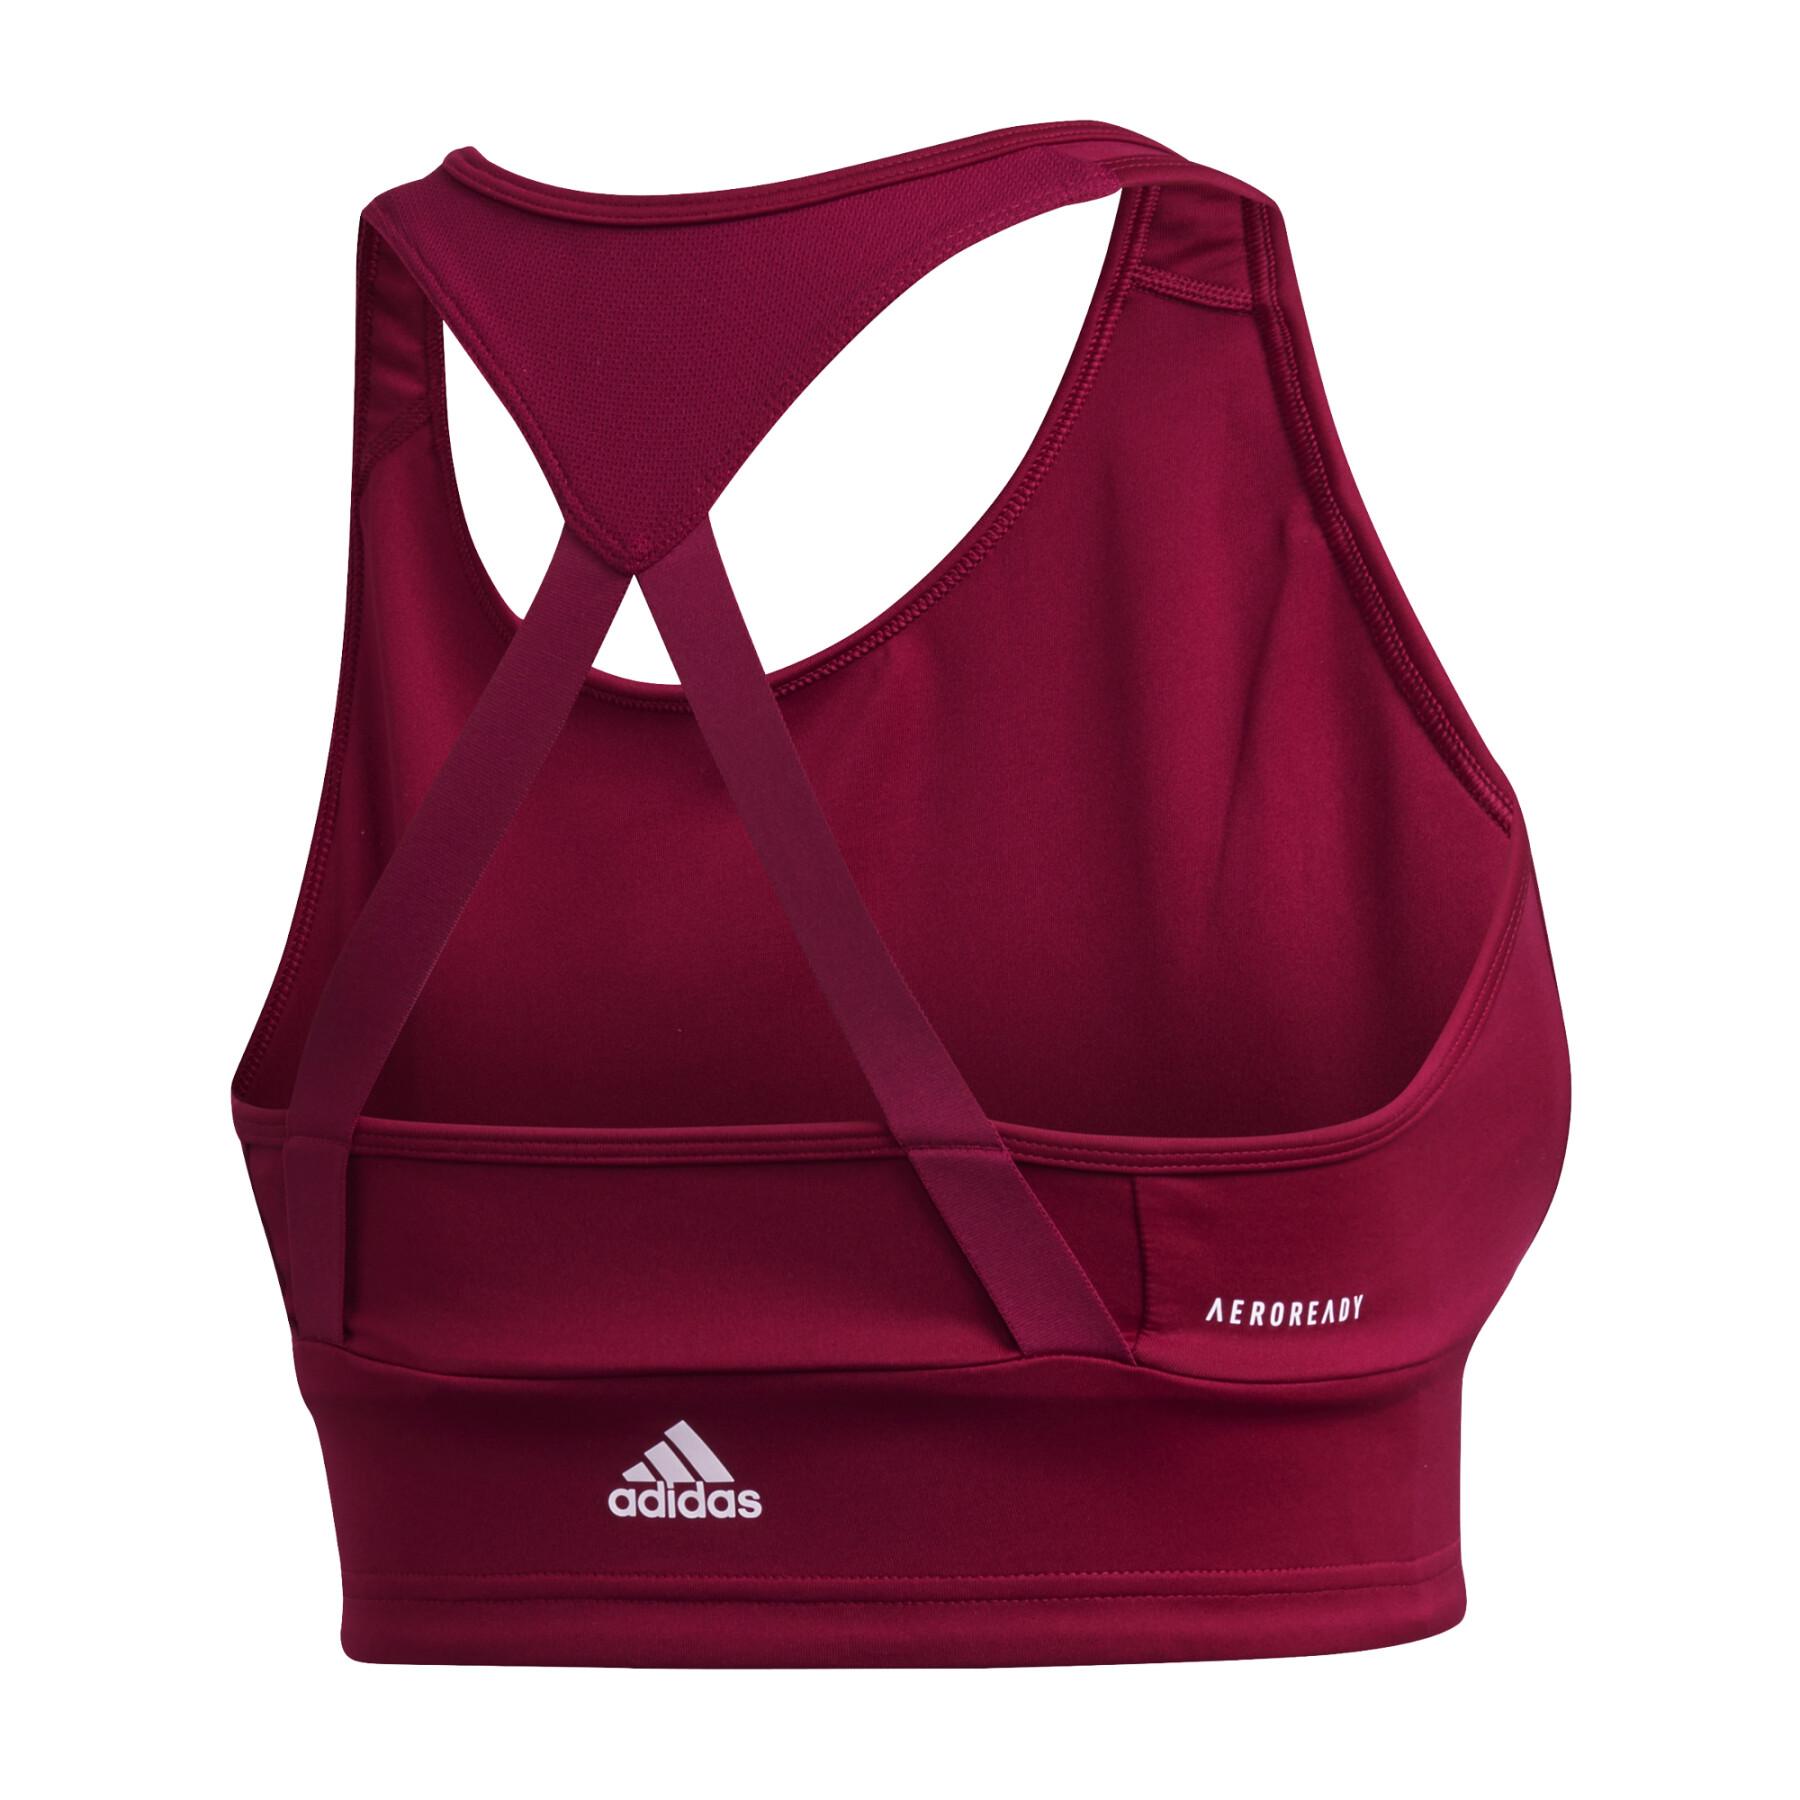 Women's bra adidas Designed to MovendedTop